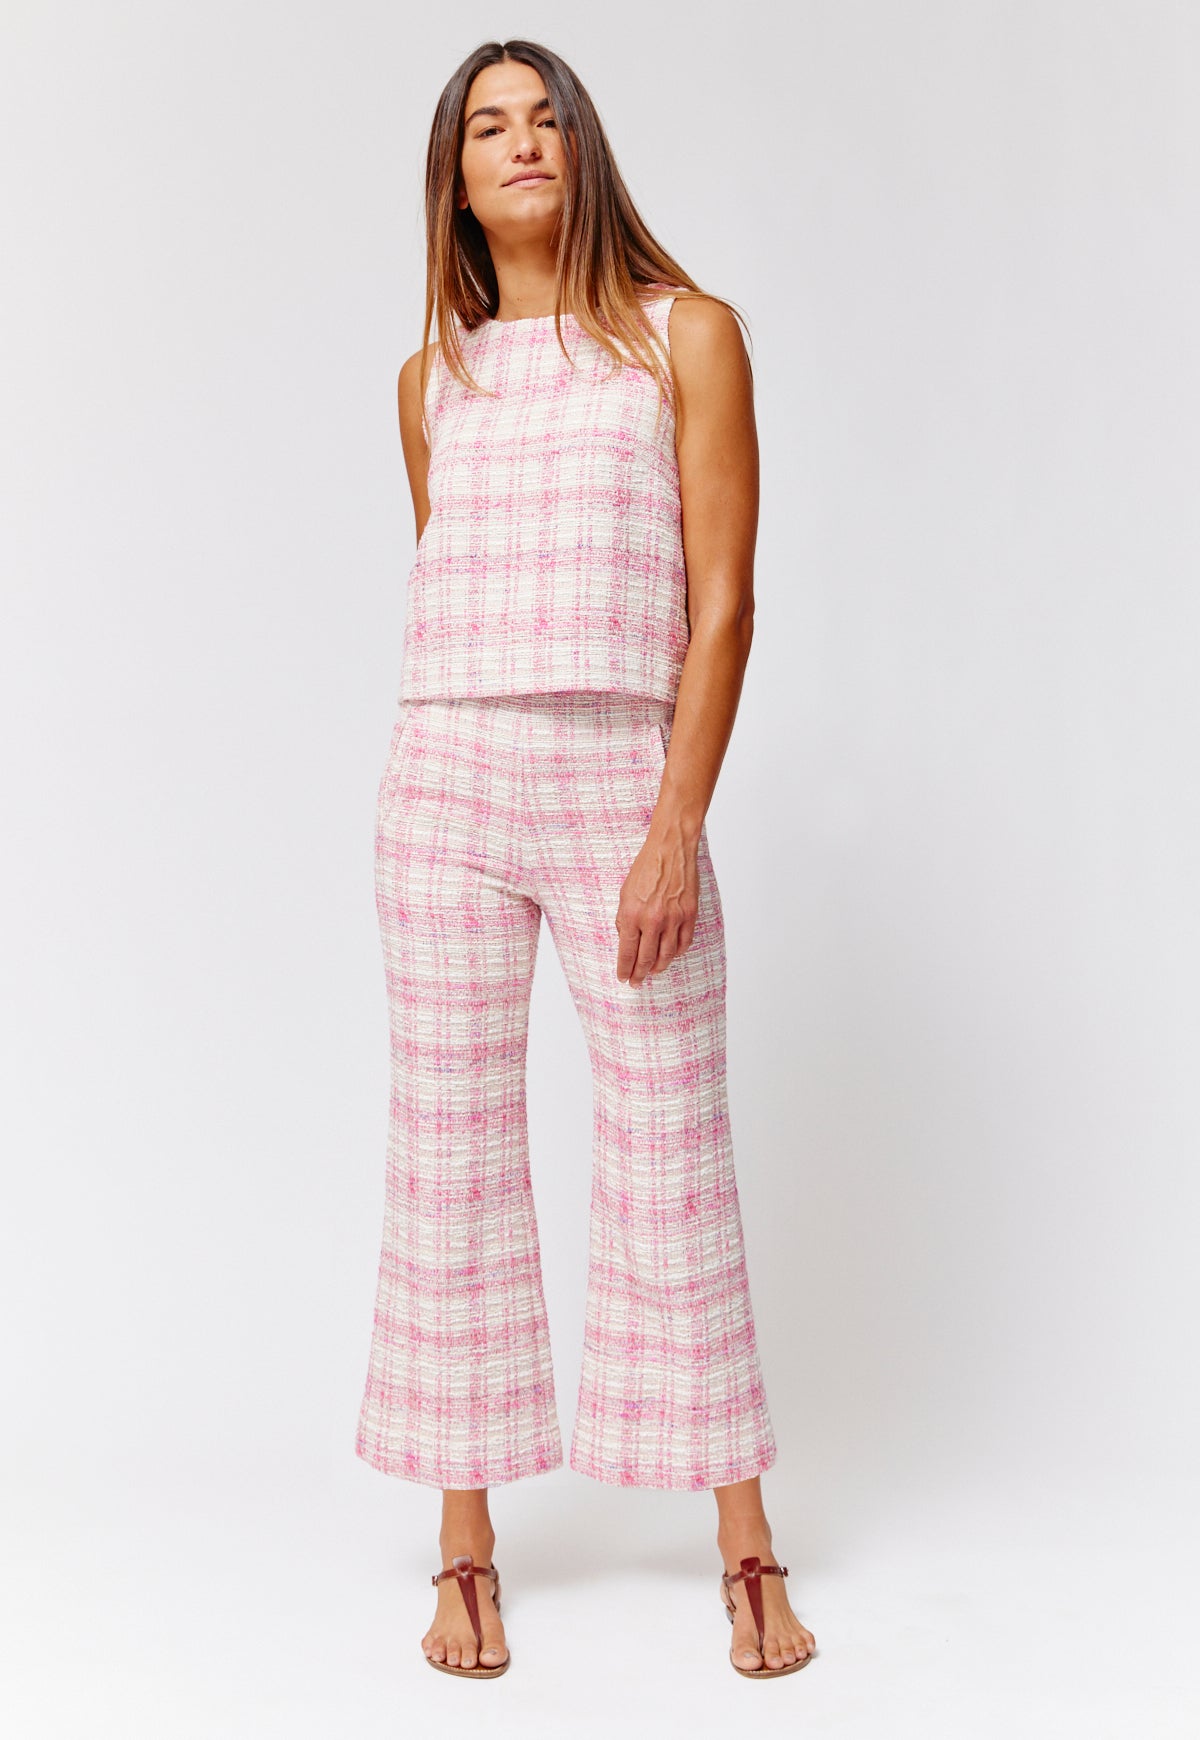 THE FLARE CROPPED TROUSER in PINK TWEED